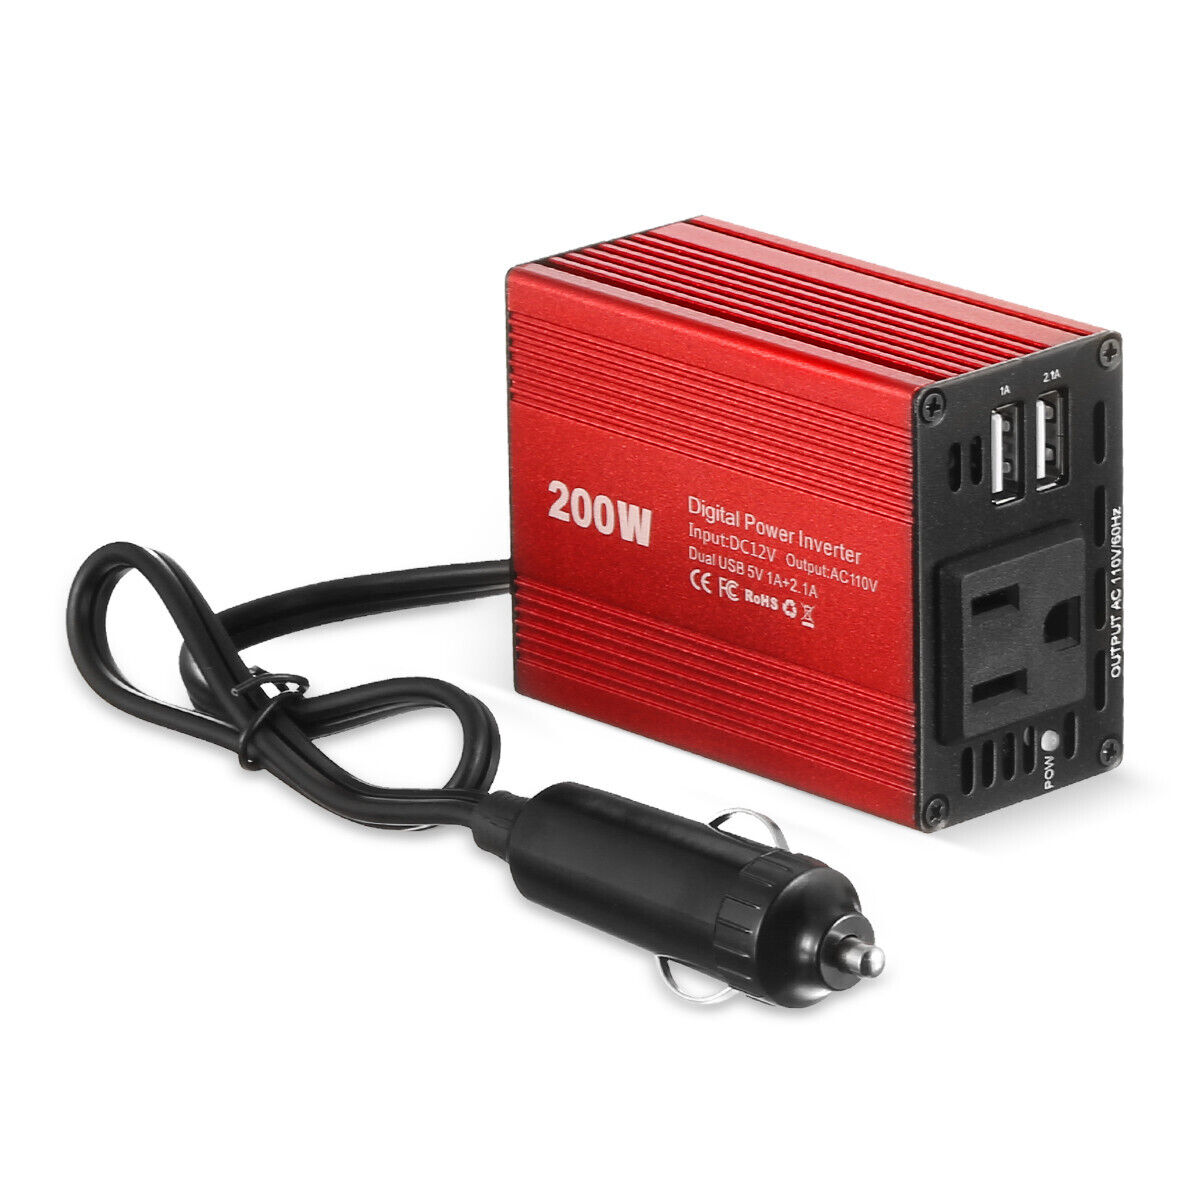 200W Car Power Inverter DC 12V to AC 110V 120V Converter Adapter Charger Outlet Powerextra Does Not Apply - фотография #11